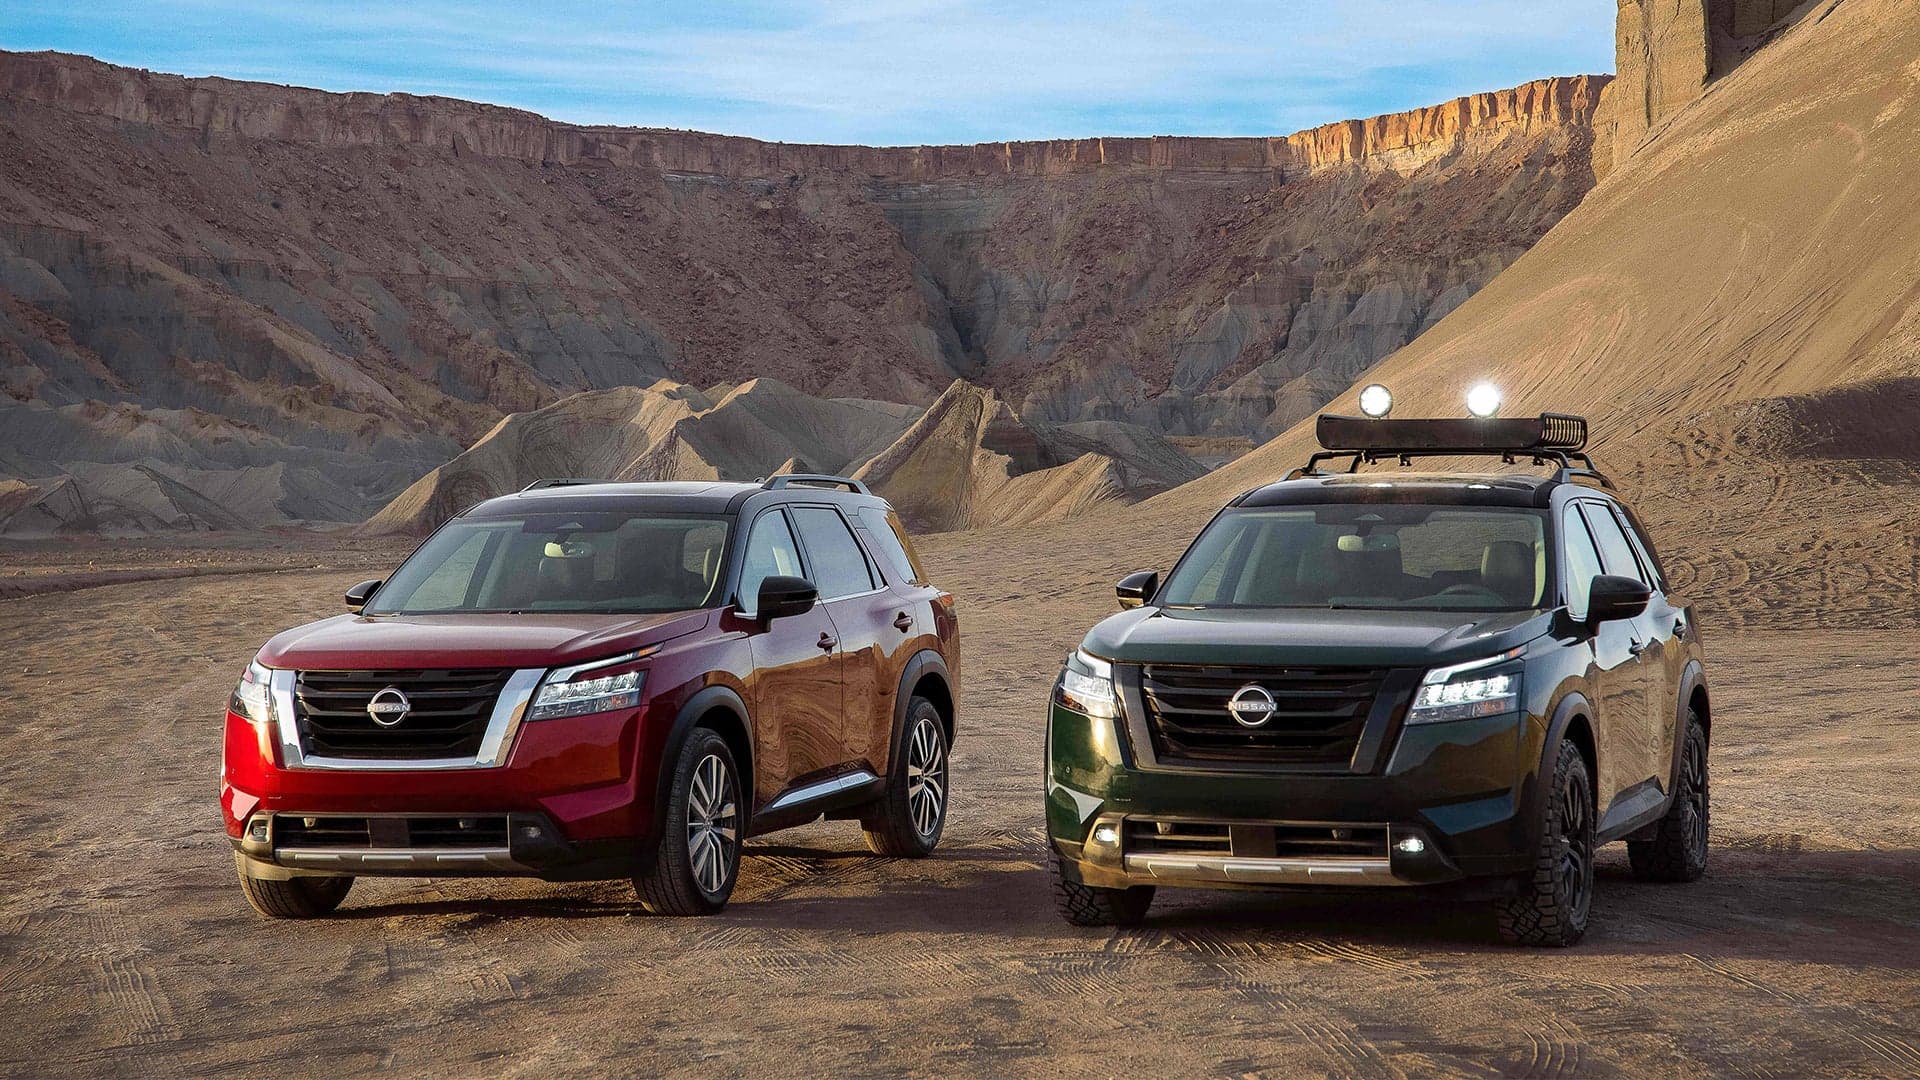 2022 Nissan Pathfinder: A Three-Row Crossover Vaguely Remembers Its Rugged Roots